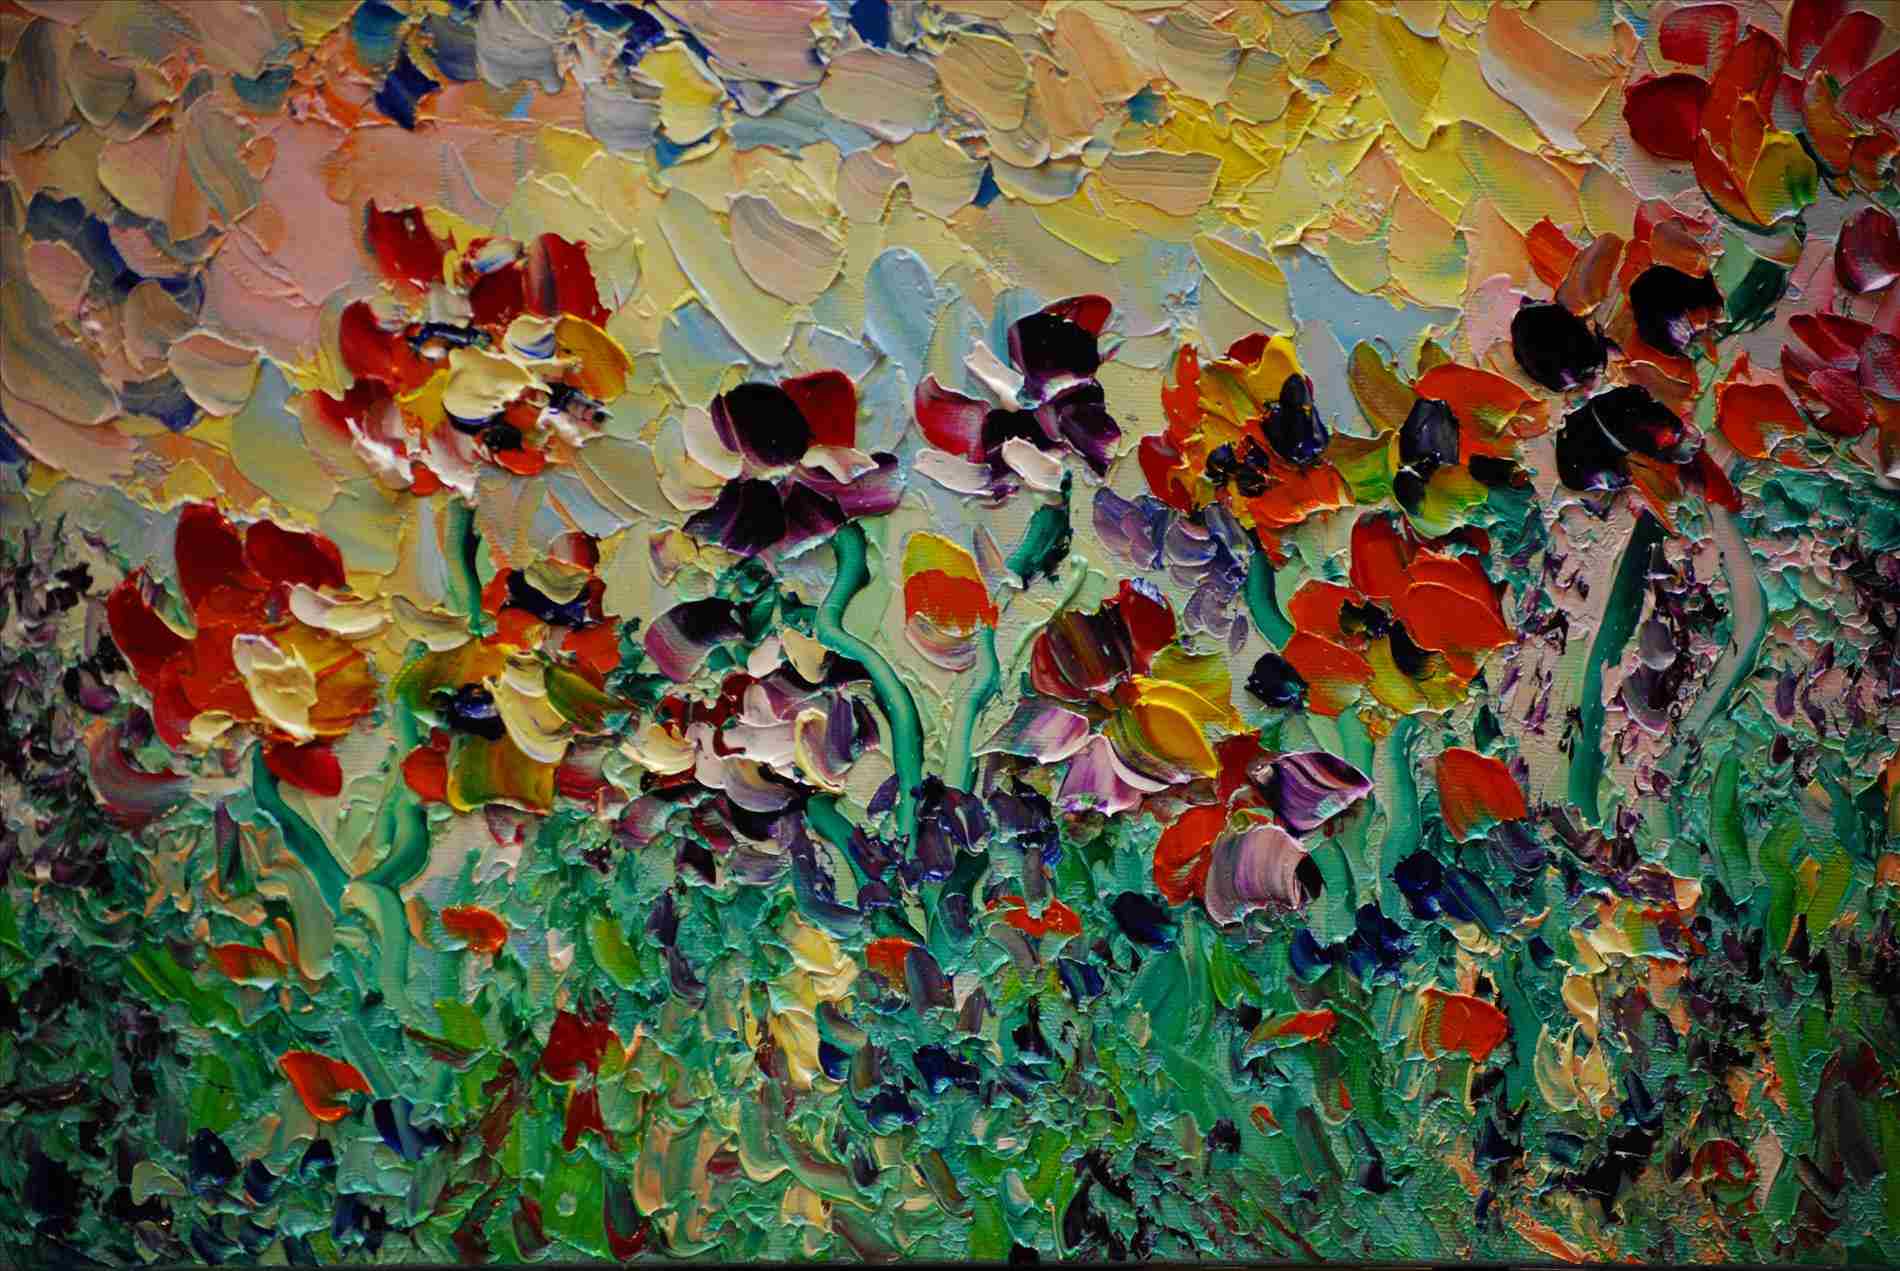 abstract garden painting | teazr.me